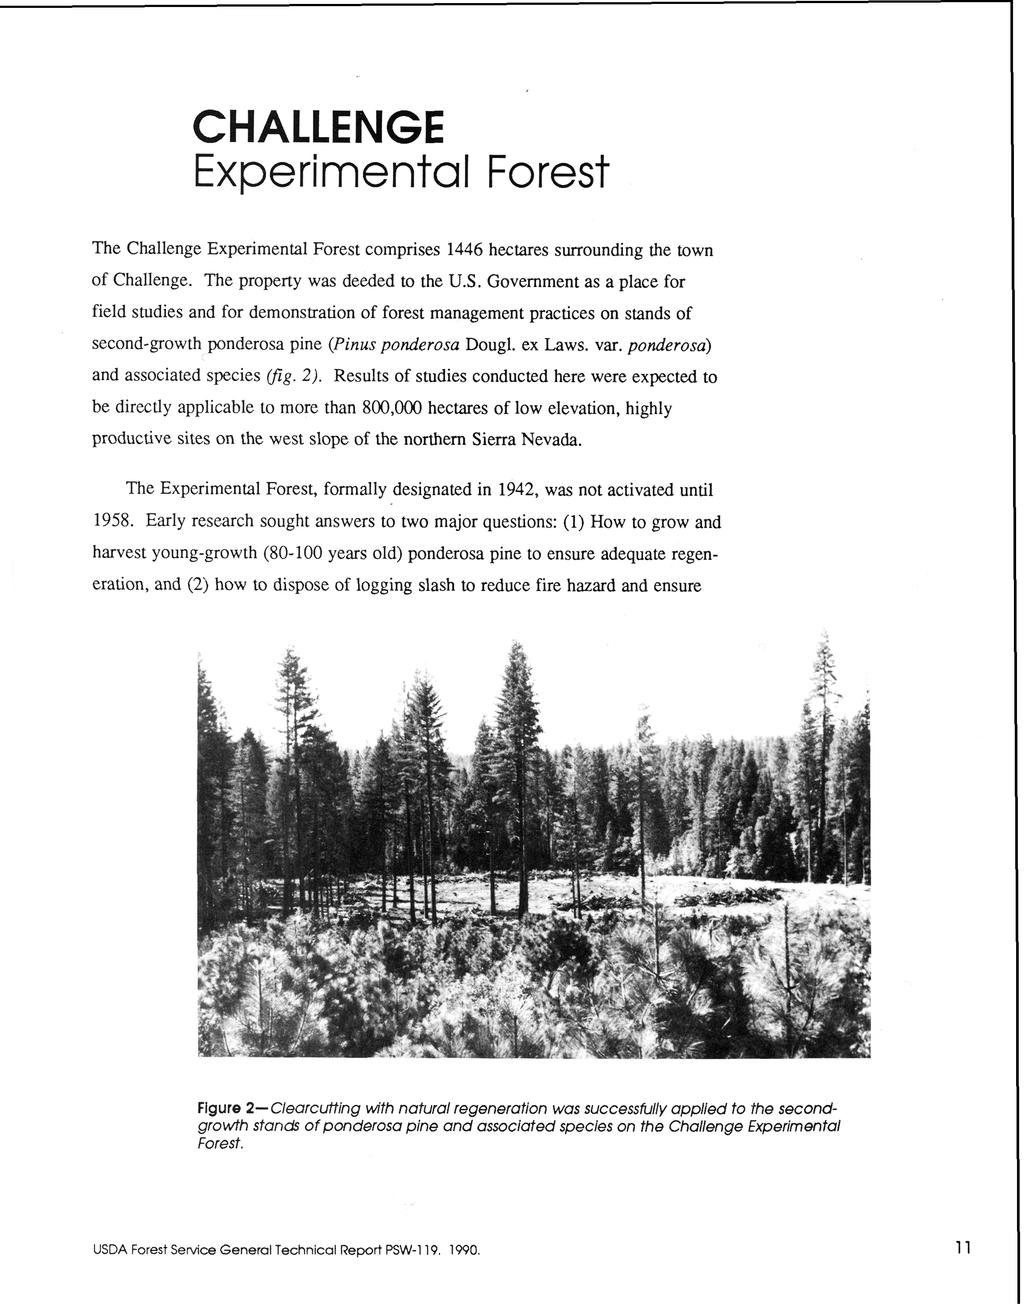 CHALLENGE Experimental Forest The Challenge Experimental Forest comprises 1446 hectares surrounding the town of Challenge. The property was deeded to the U.S.